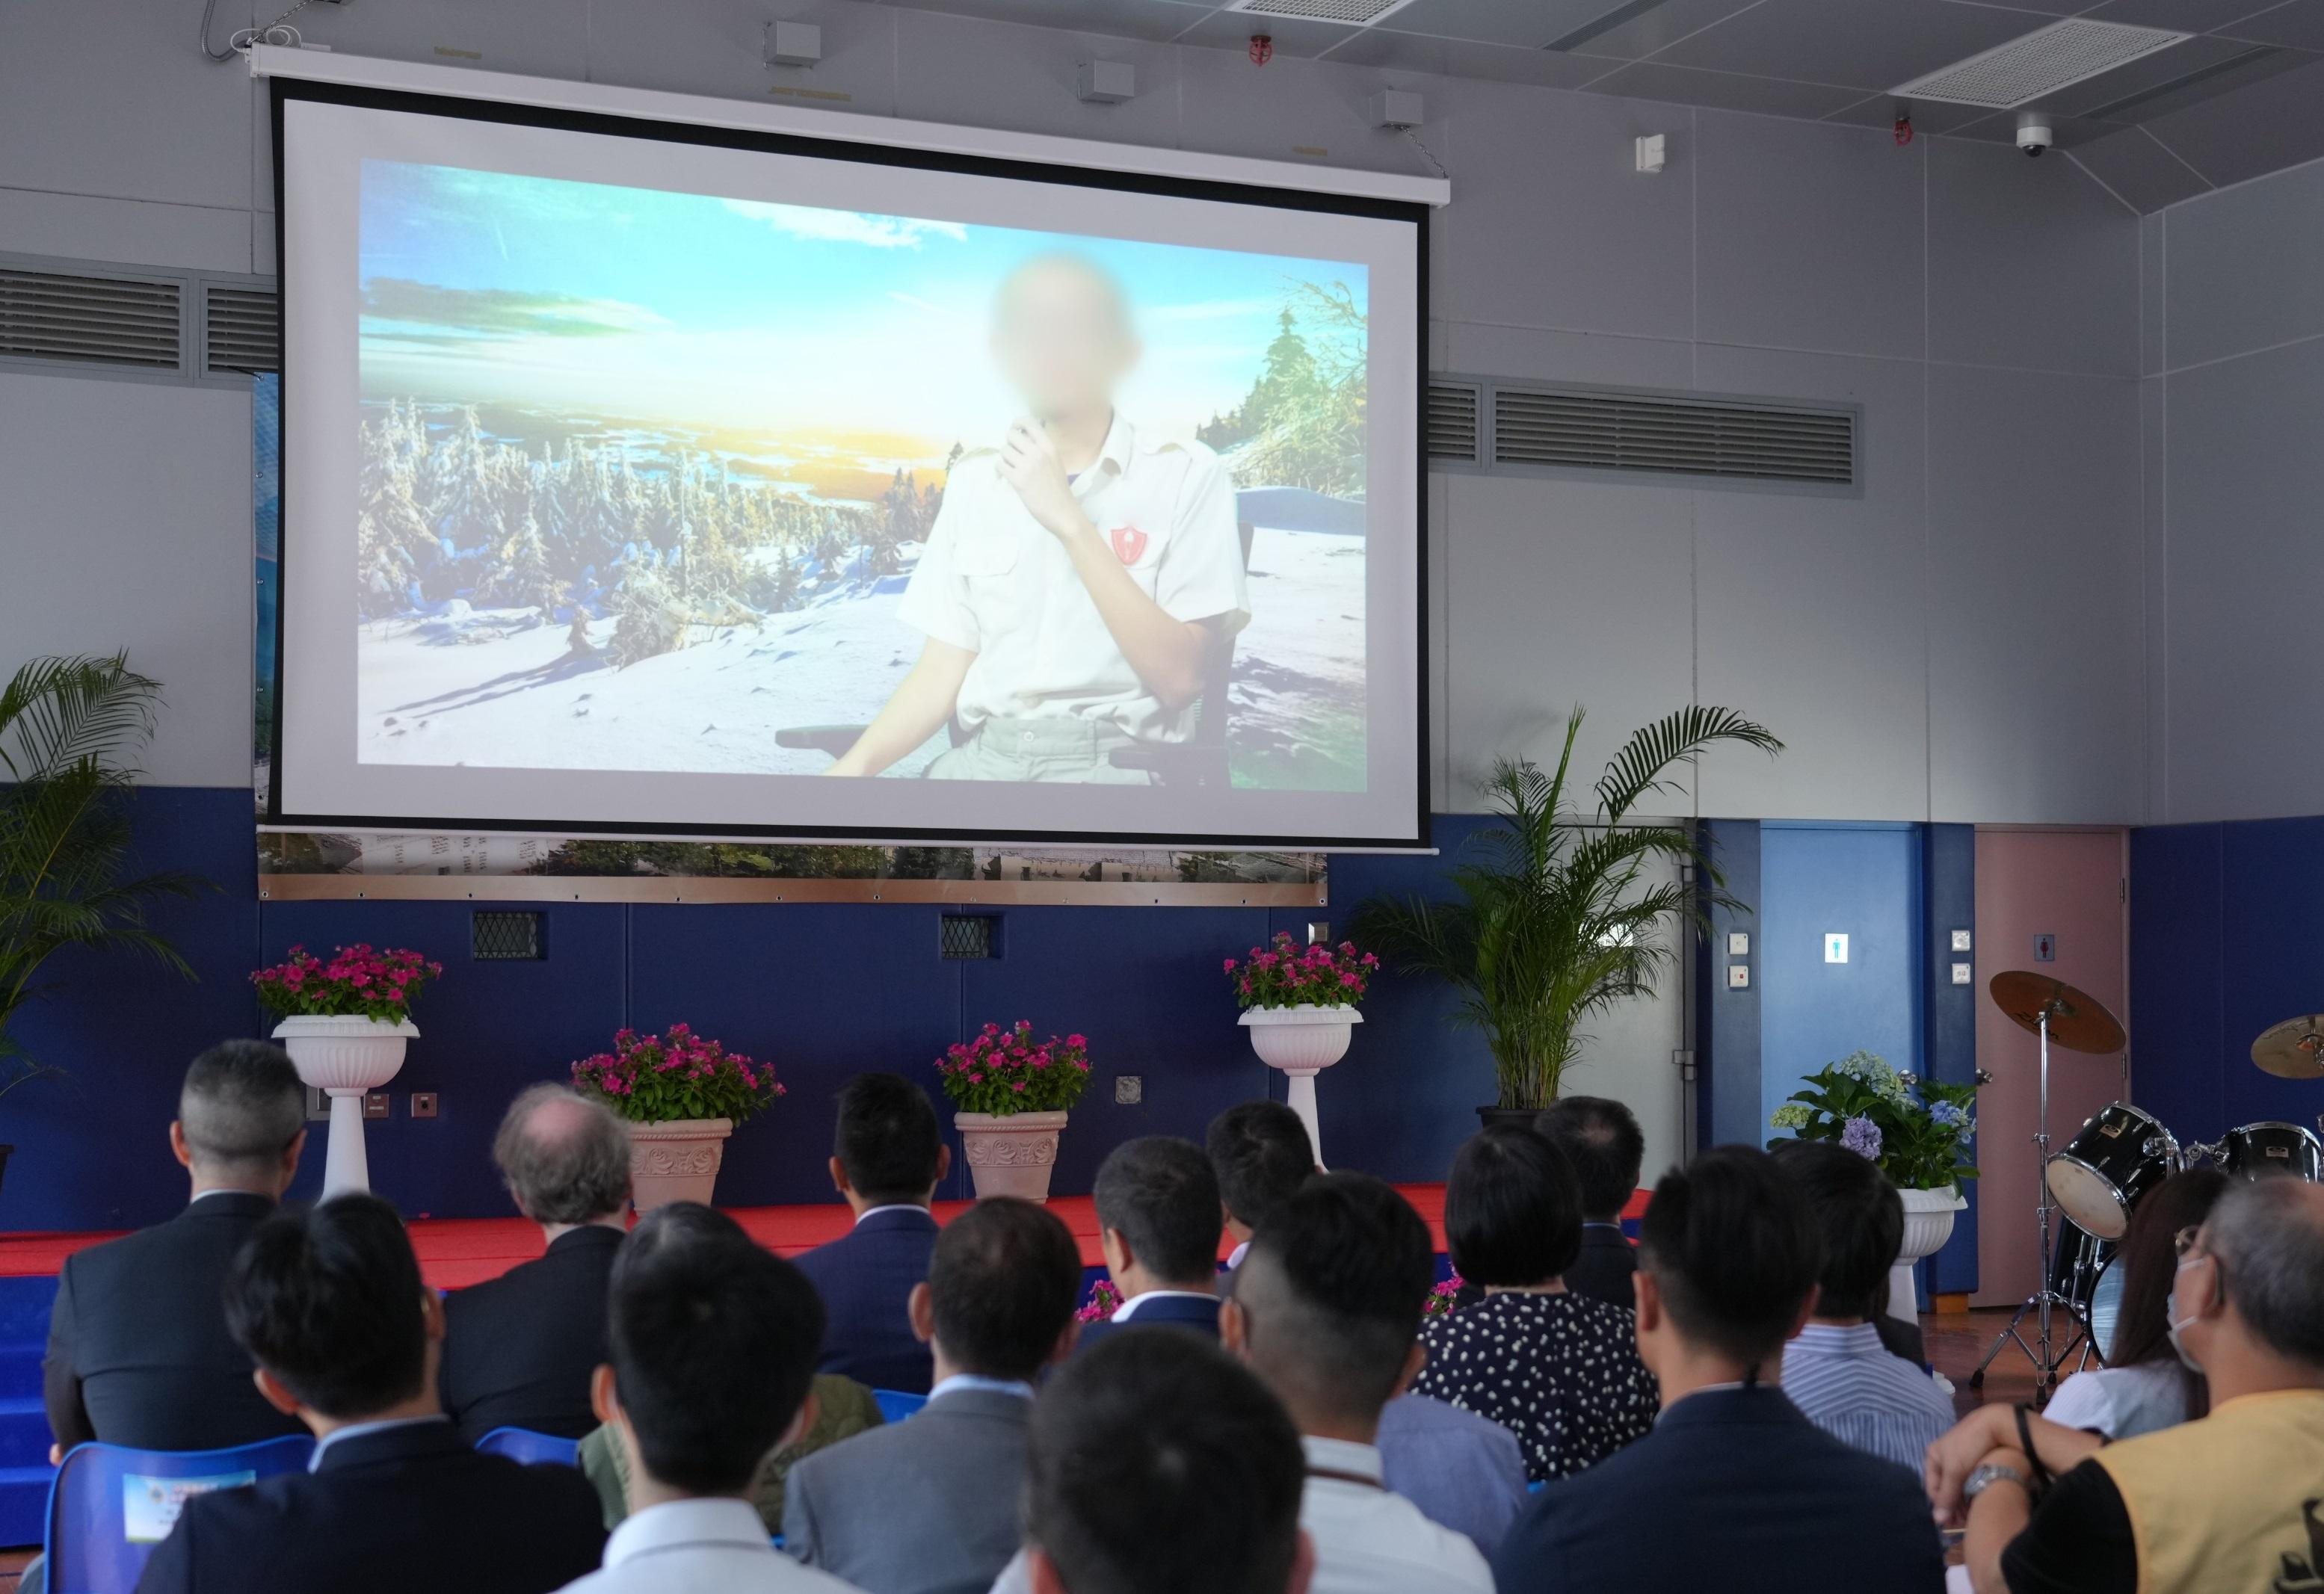 Young persons in custody (PICs) at Sha Tsui Correctional Institution of the Correctional Services Department were presented with certificates at a ceremony today (October 13) in recognition of their efforts and achievements in studies and vocational examinations. Photo shows guests attending the ceremony watching a short video produced by PICs.